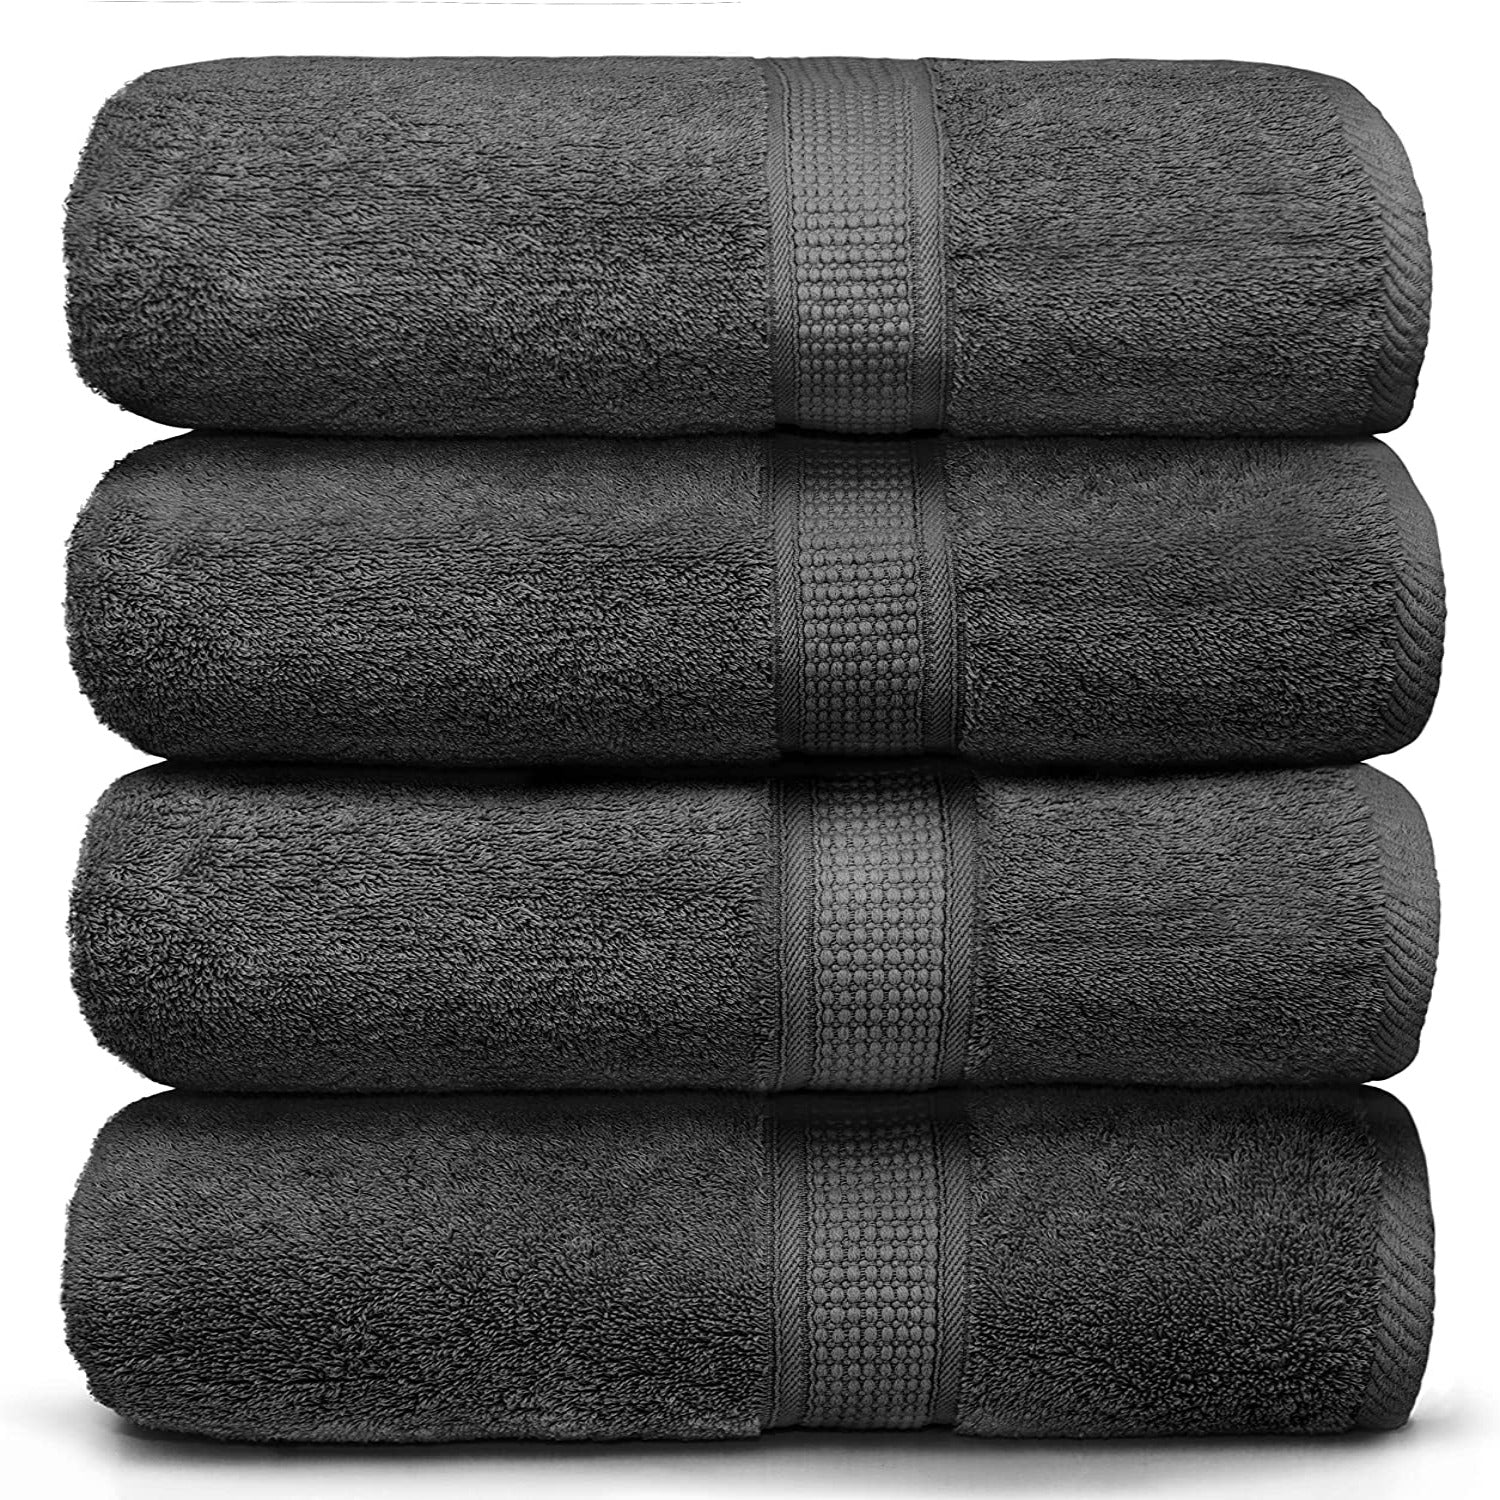 Bamboo Beach Towel Soft Absorbent Fast Drying Gentle on the Skin (4 Pieces)